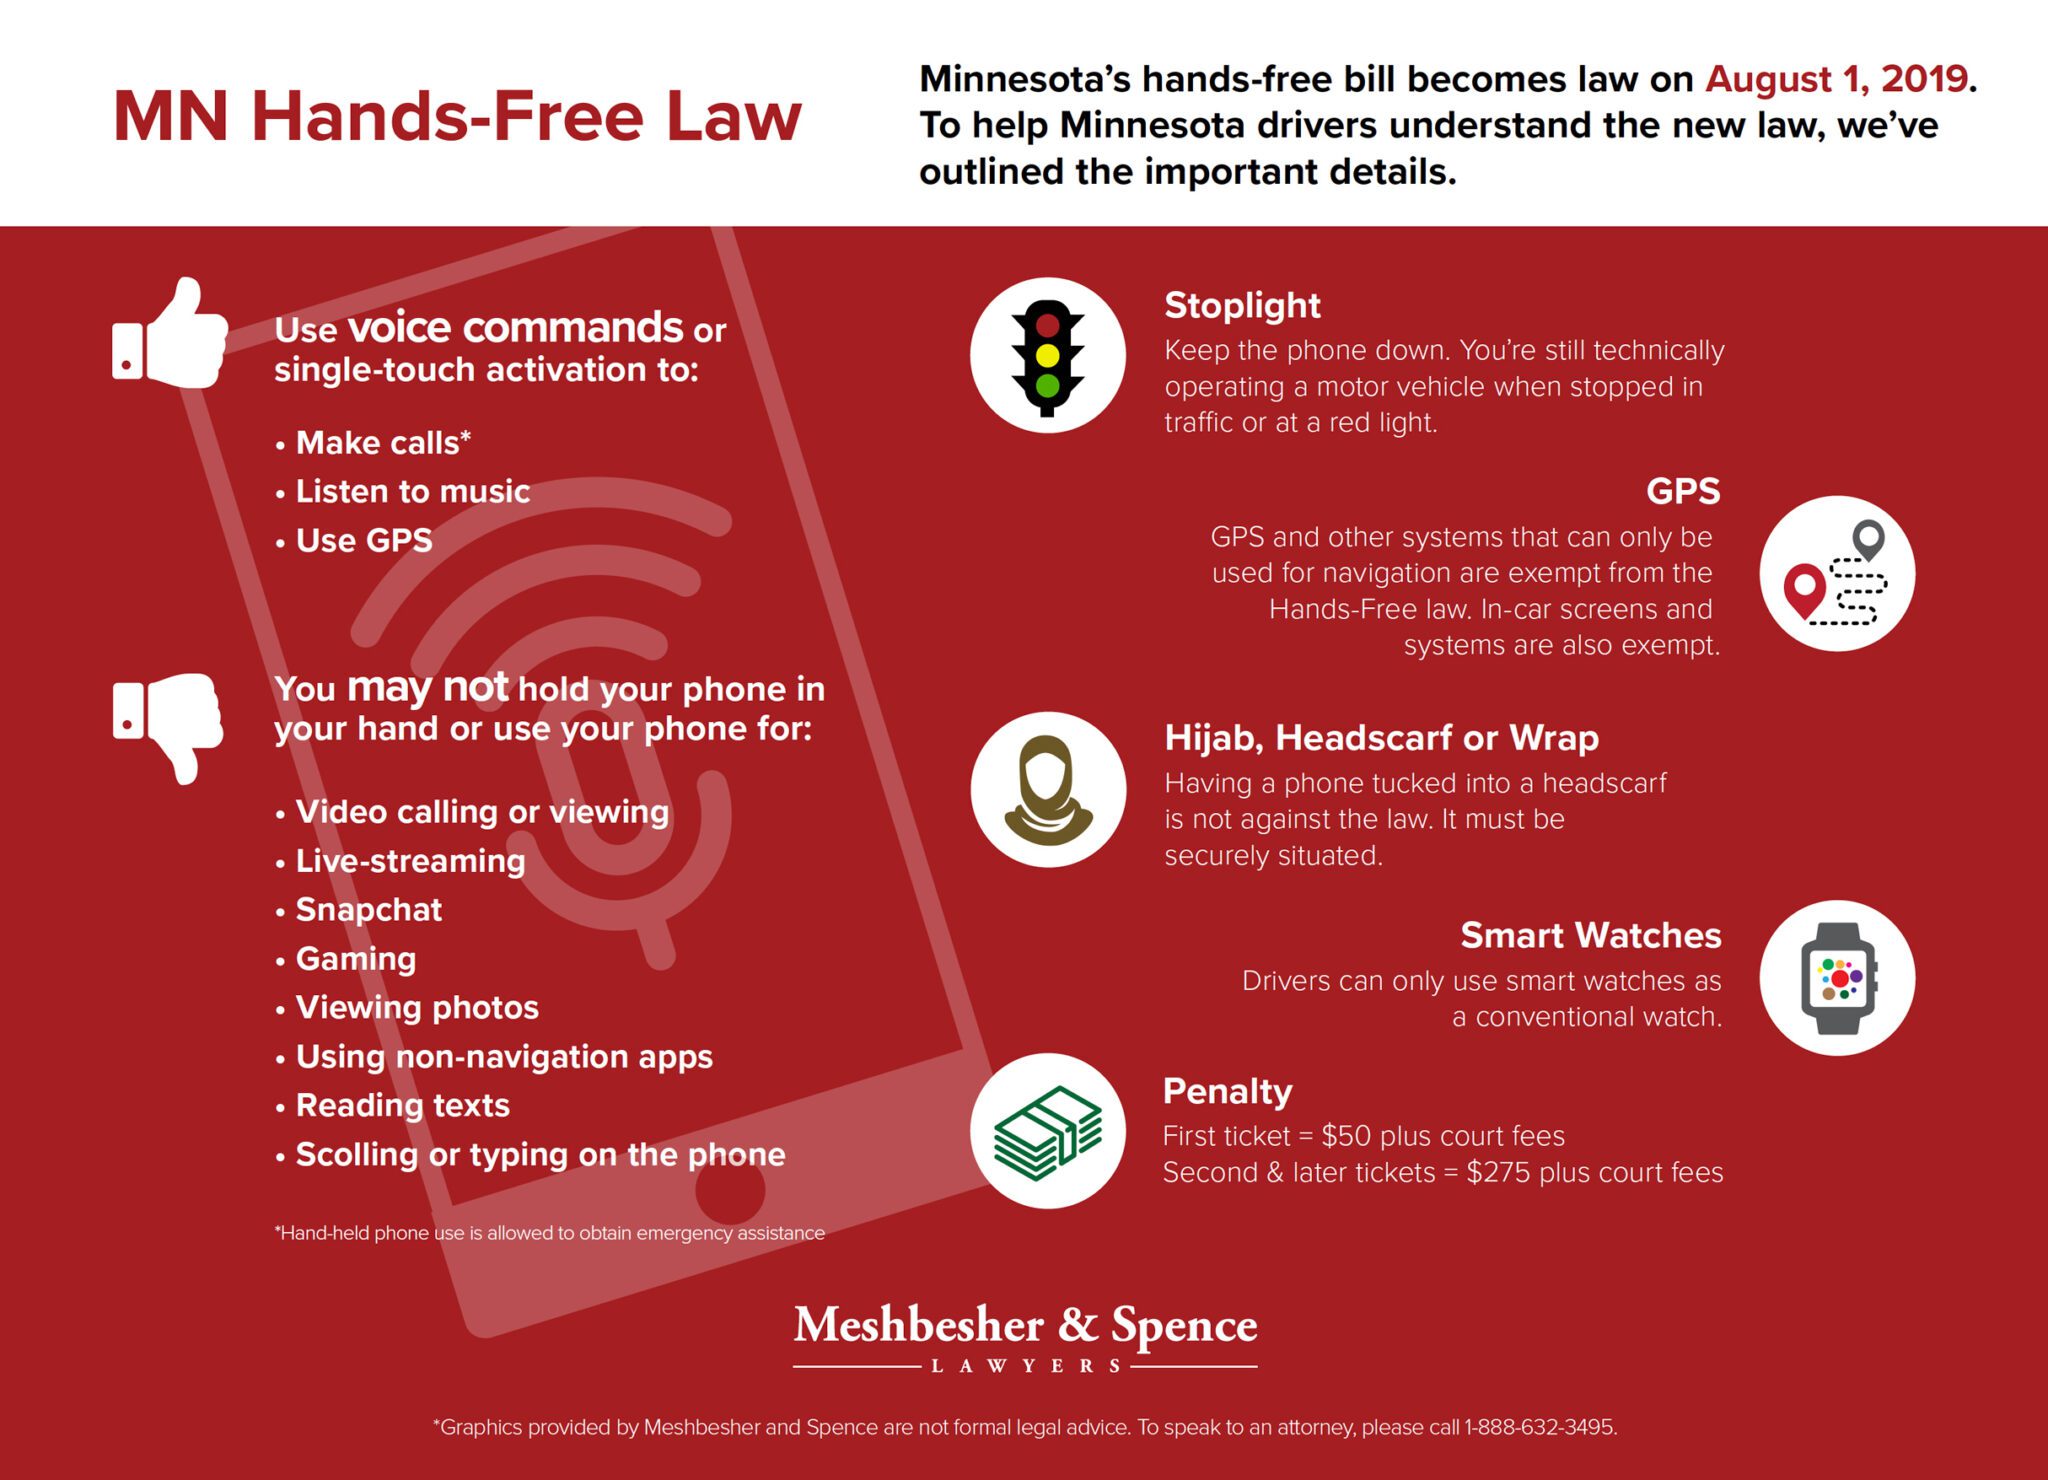 MN Hands-Free Law